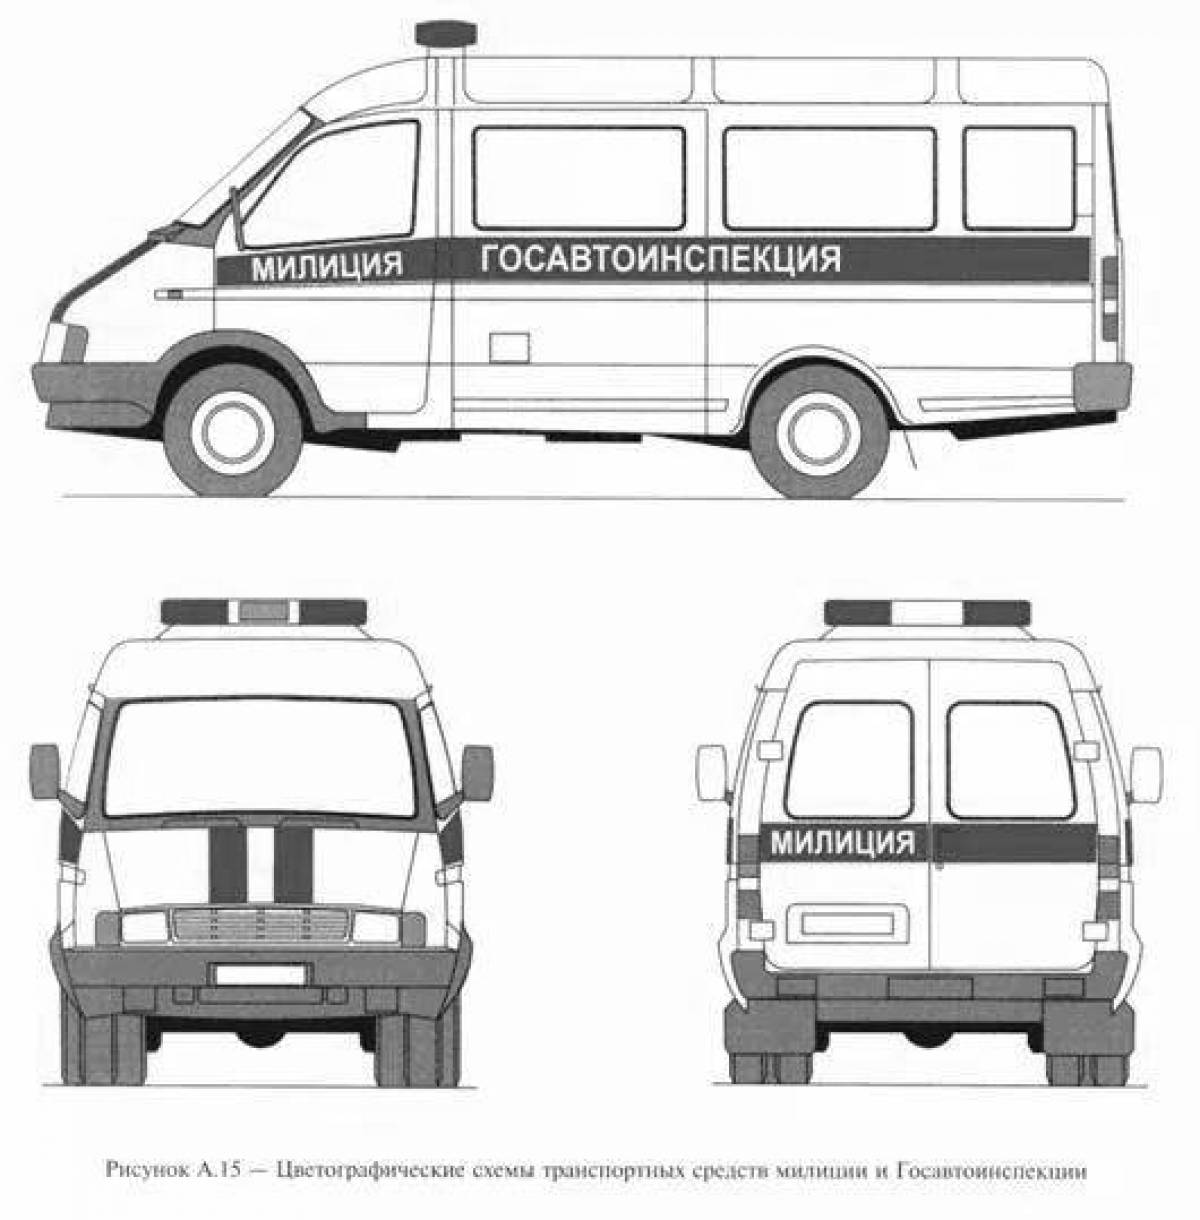 Coloring page is a busy police bus